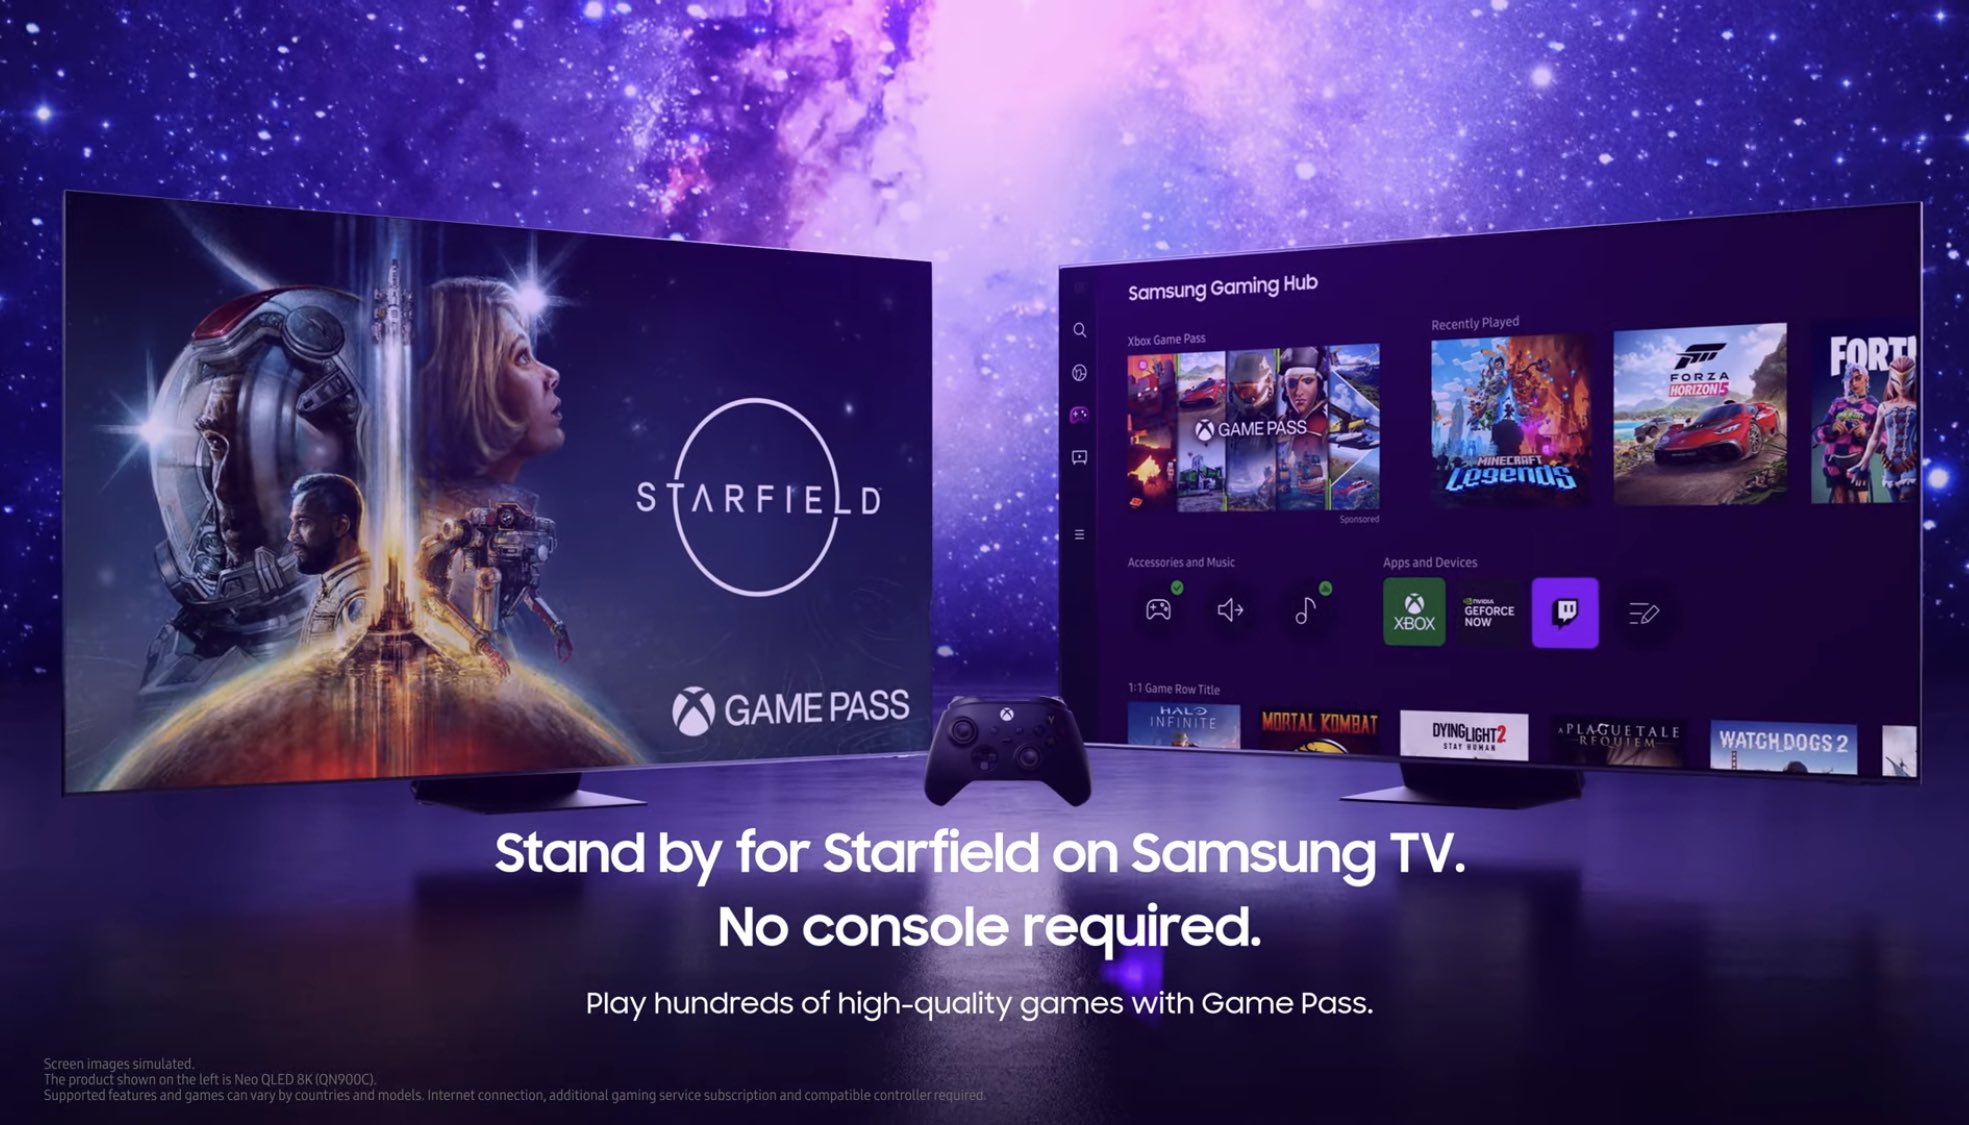 Starfield Union🚀🌌 on Twitter: "NEW: You will be able to play #Starfield  on your Samsung TV via xCloud. No console required👀🚀  https://t.co/kGvOgv6bEi" / X